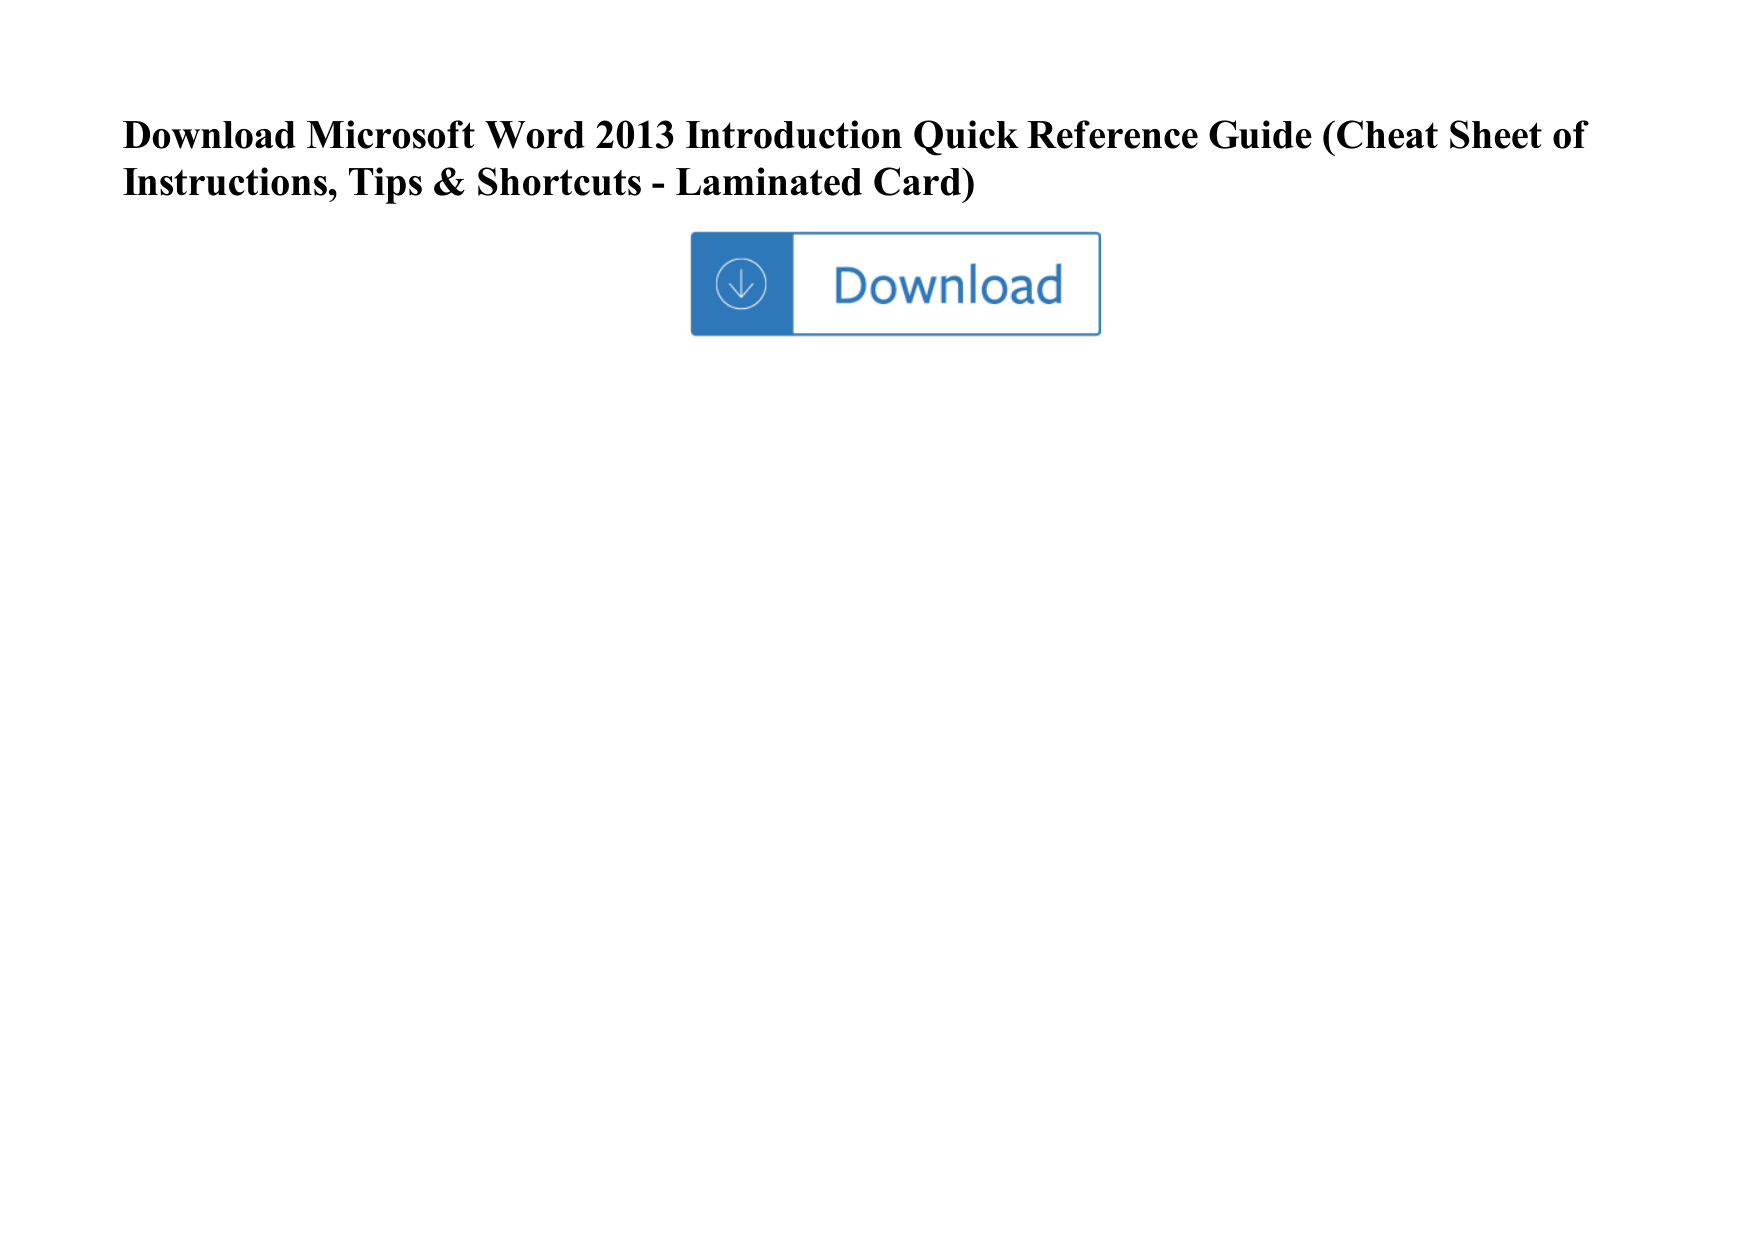 Page 1 of 1 - 2013 Introduction Quick Reference Guide (Cheat Sheet Of Instructions, Tips & Shortcuts - Laminated Card) Microsoft-word-2013-introduction-quick-reference-guide-cheat-sheet-of-instructions-tips-shortcuts-laminated-card